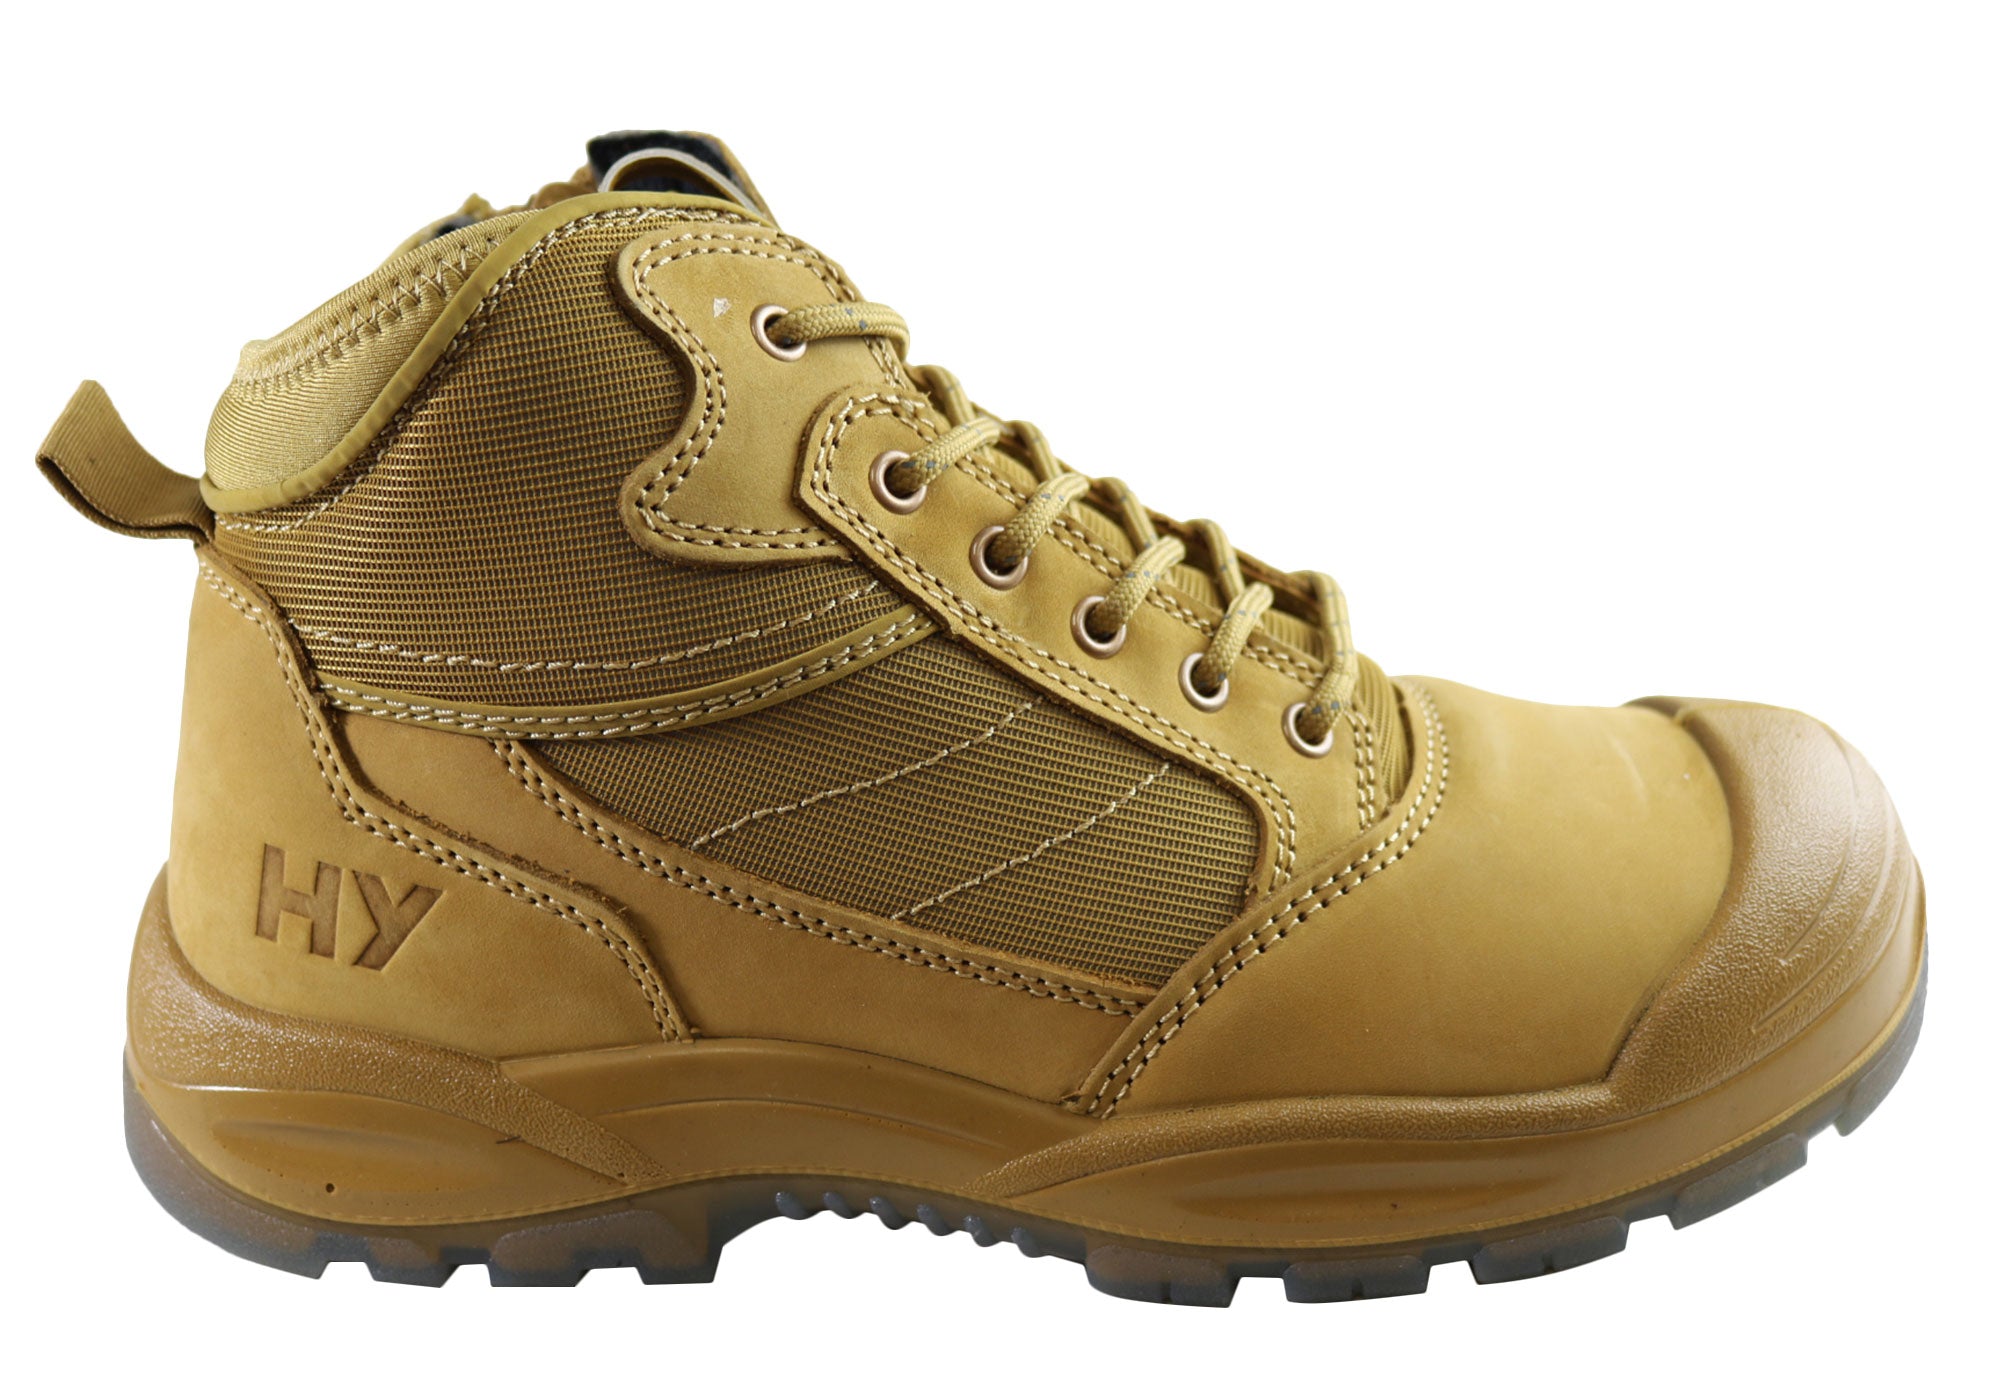 Nite Vision Steel Toe Cap Safety Boots 